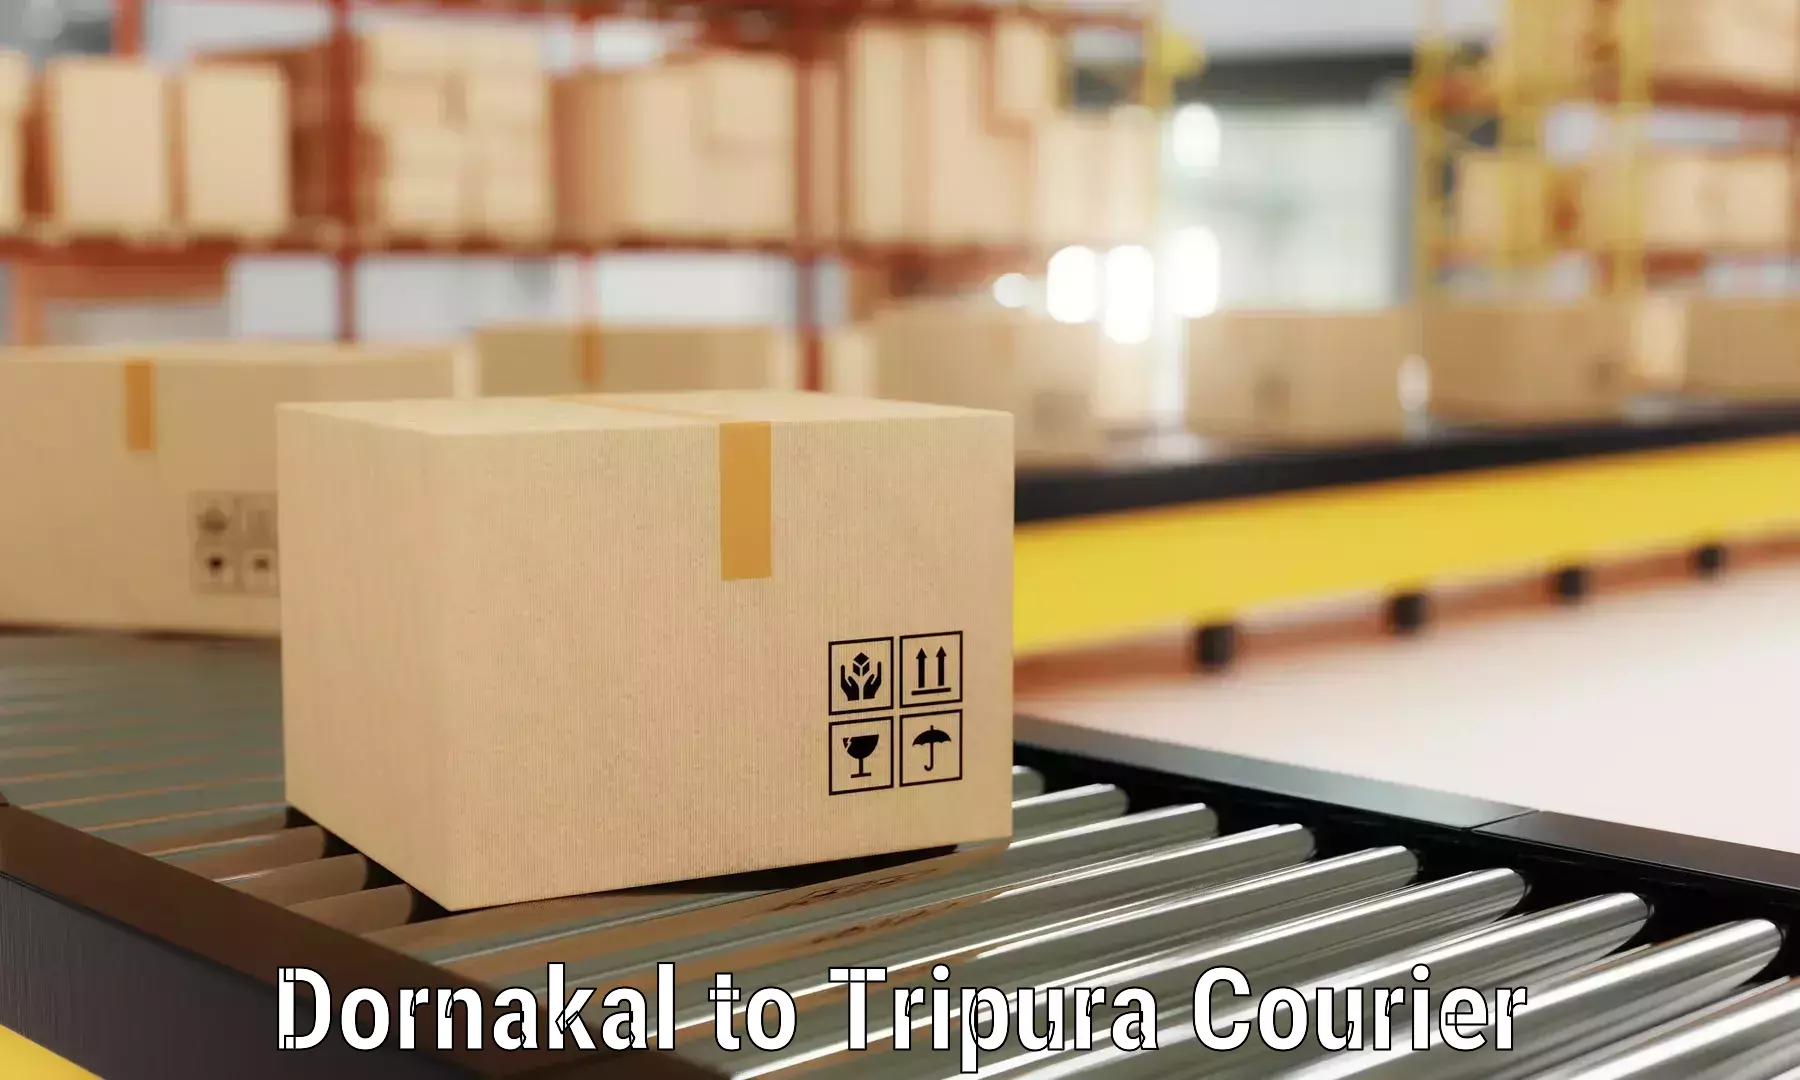 Efficient packing and moving Dornakal to IIIT Agartala